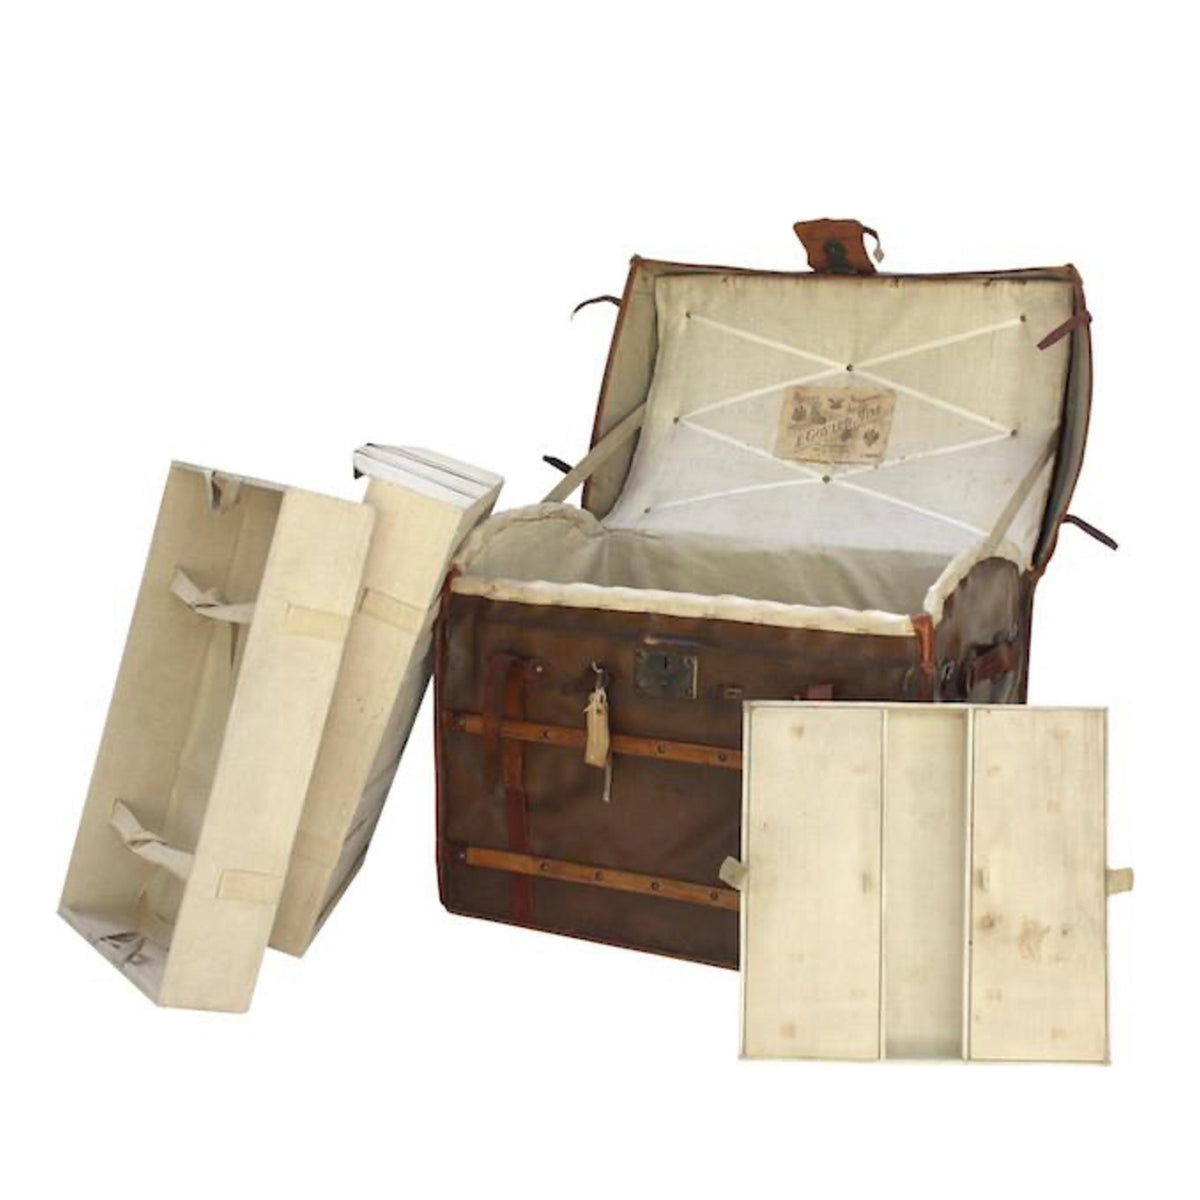 Courier Trunk